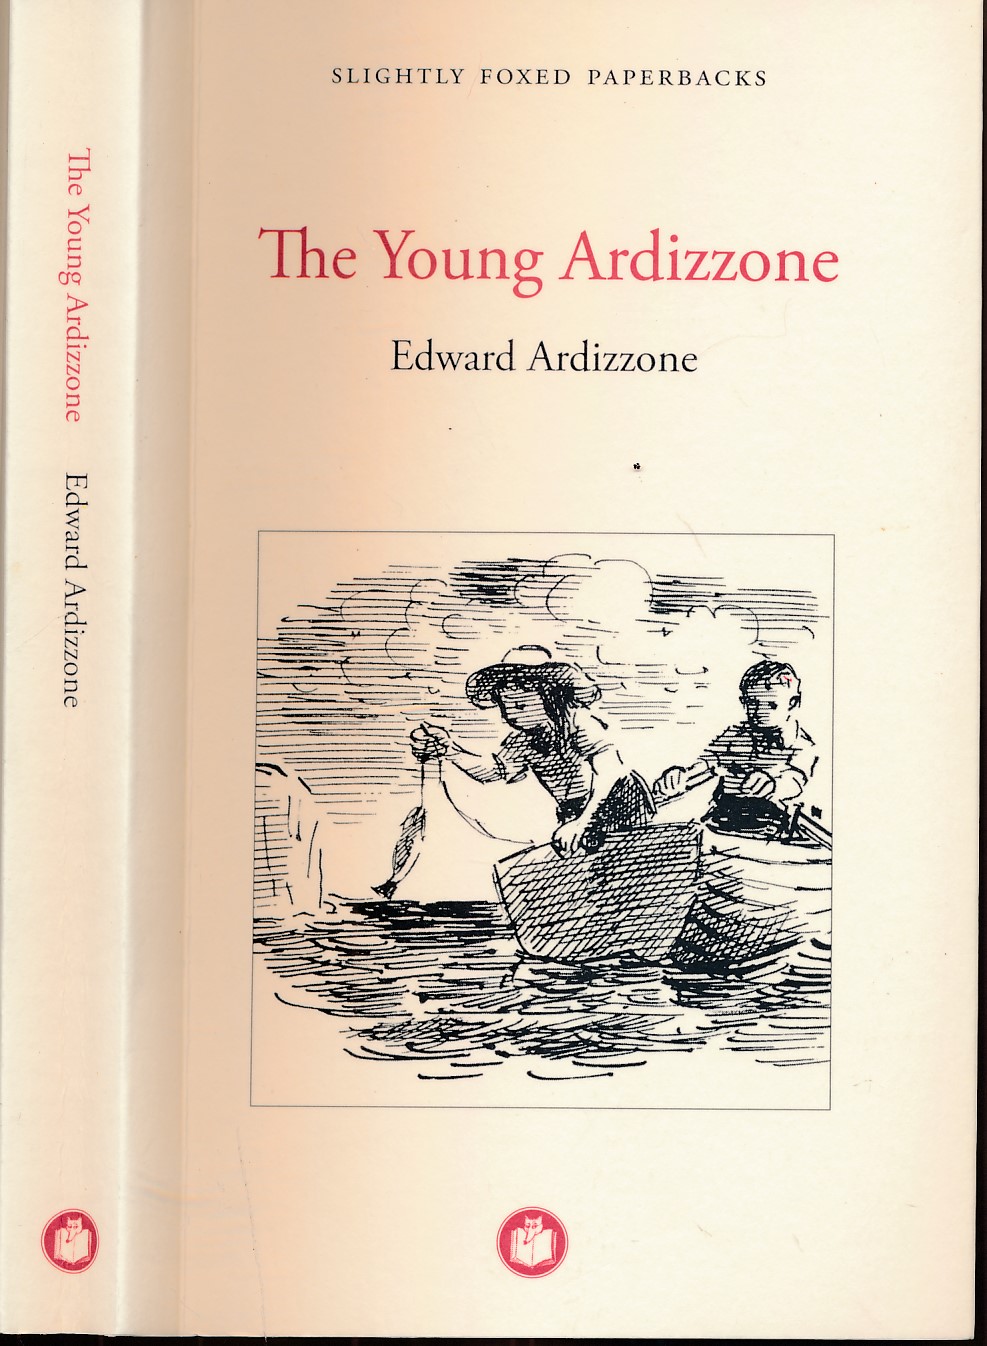 The Young Ardizzone. An Autobiographical Fragment. Slightly Foxed No 12.